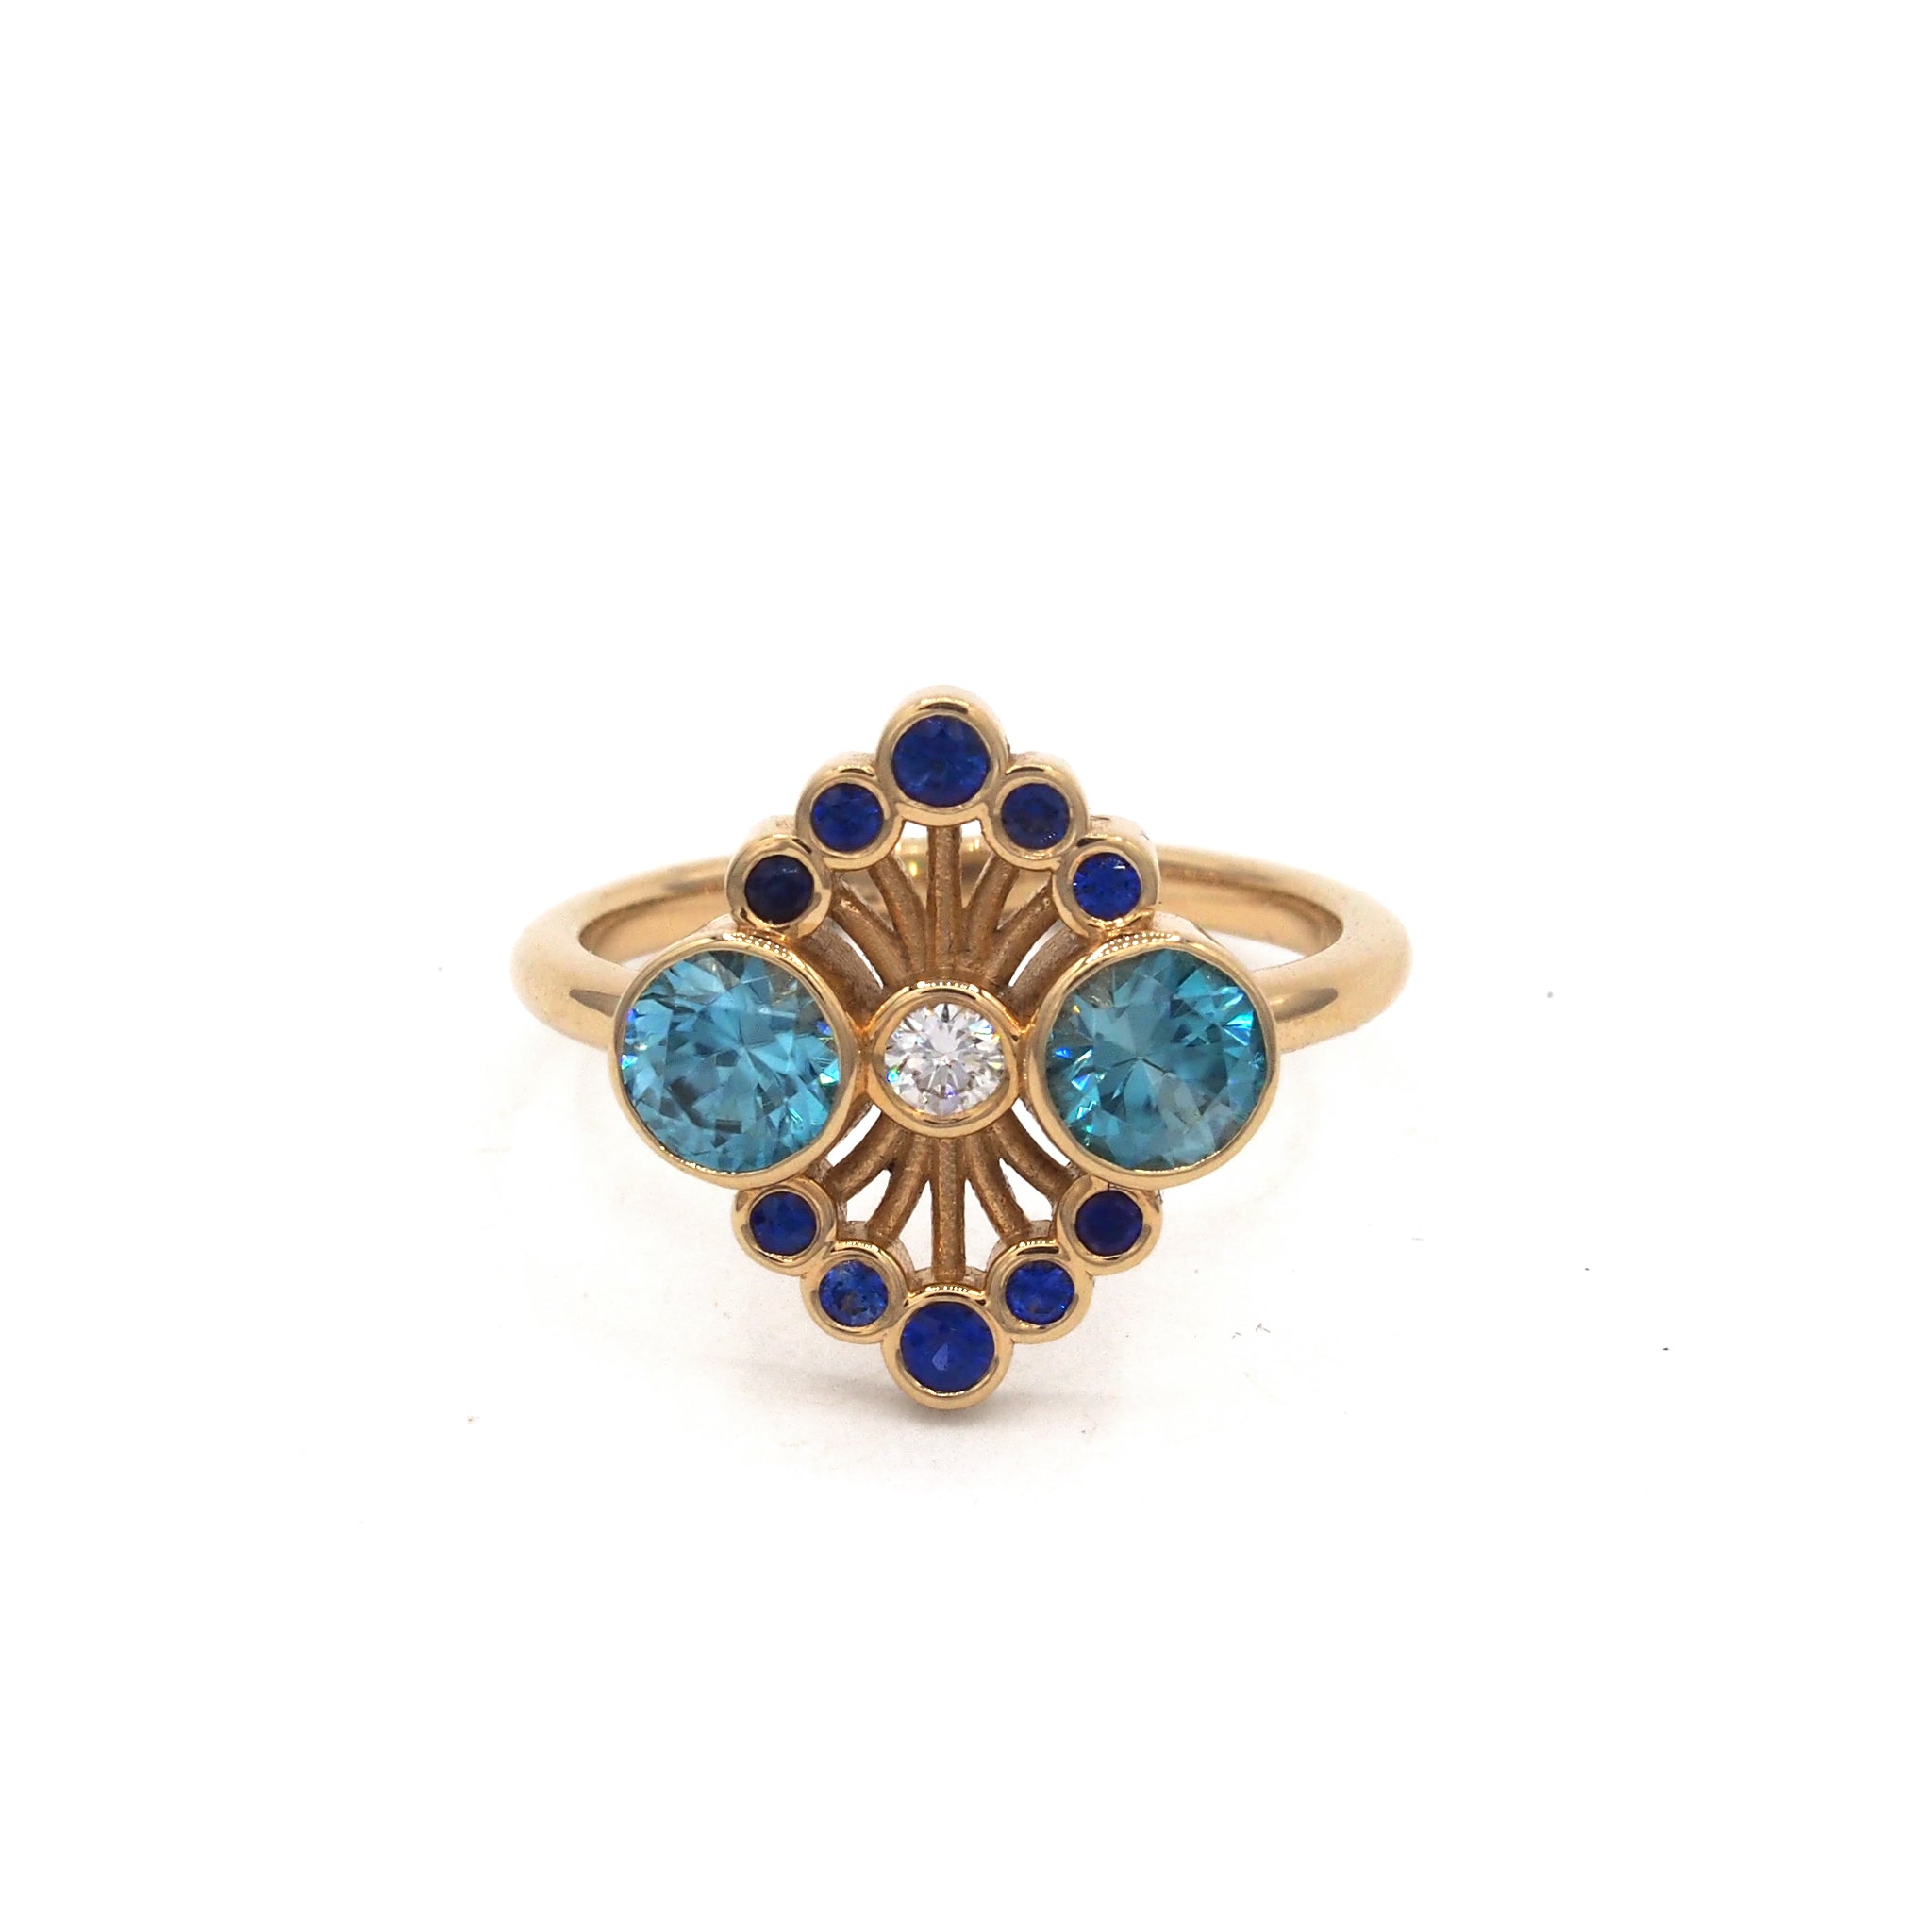 Atlantica deco ring in 14K yellow gold with natural blue zircons, blue sapphires, and diamond